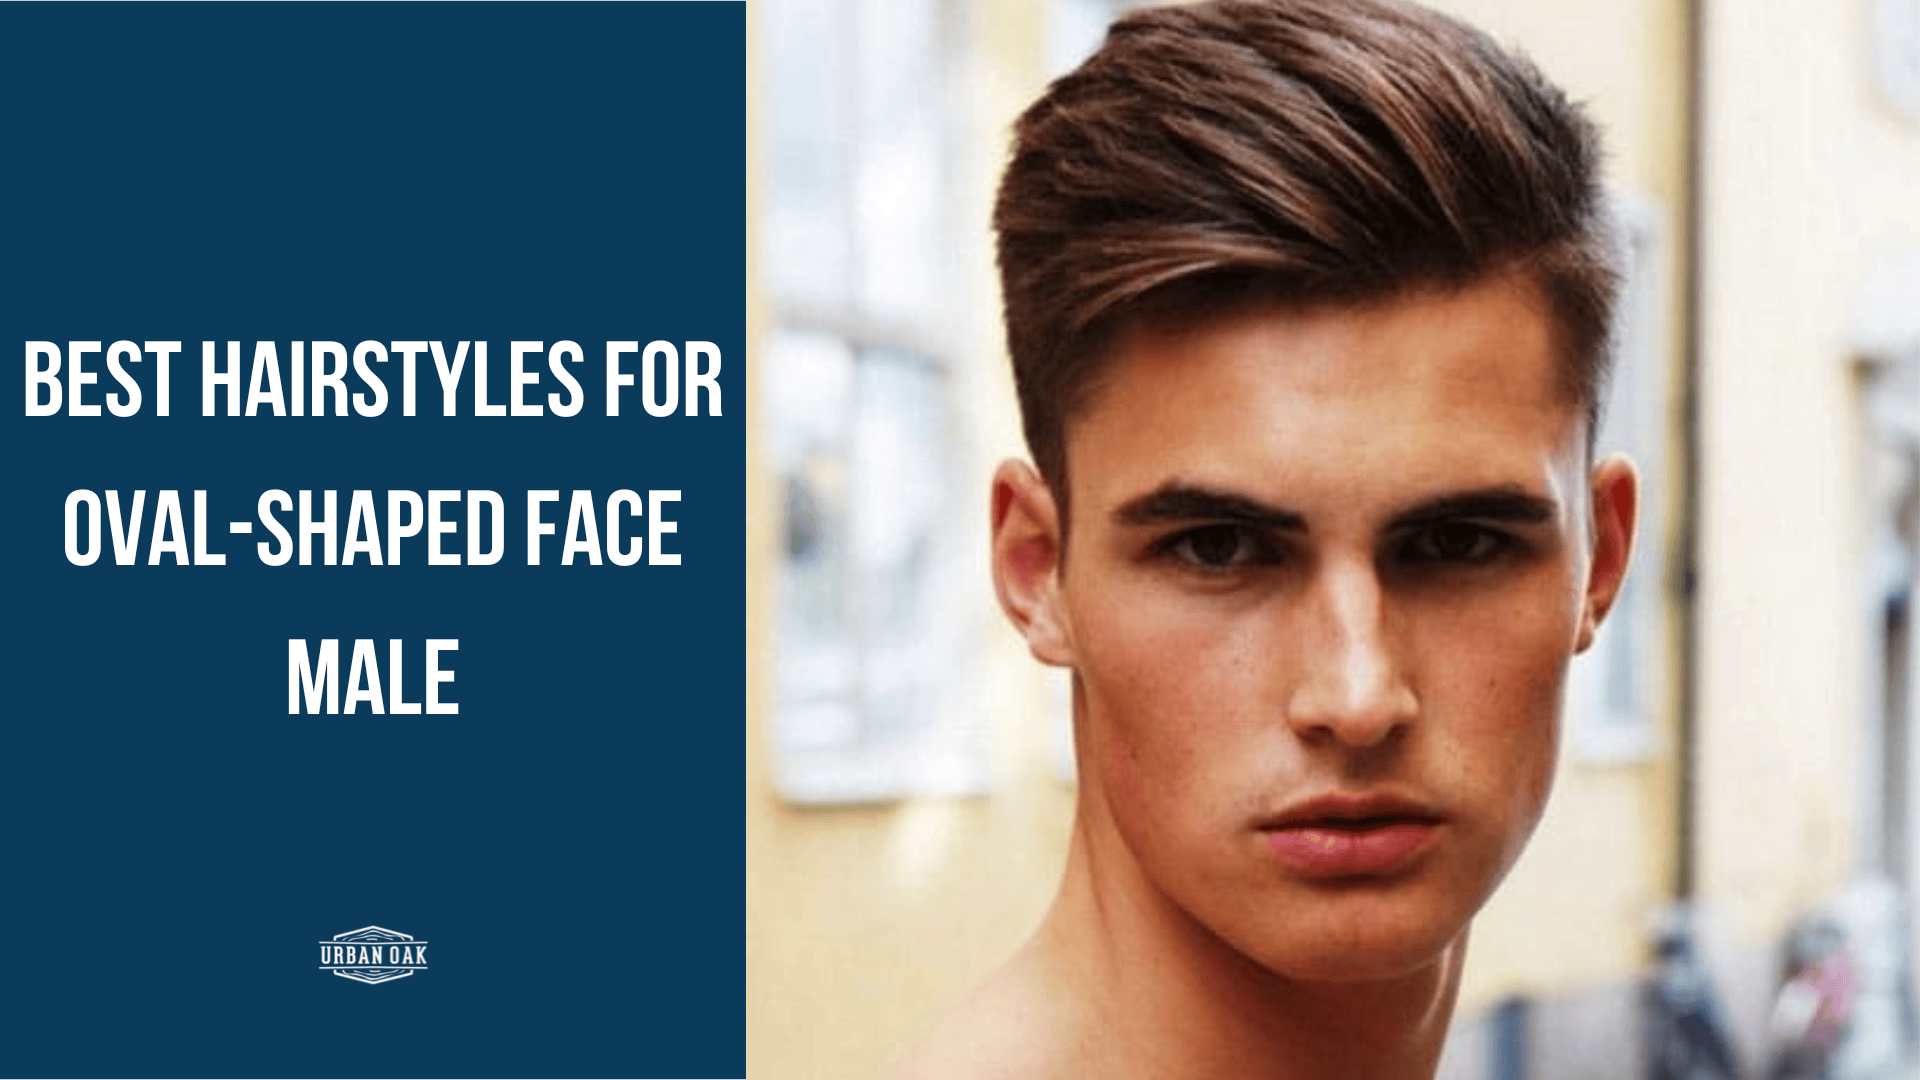 Best Hairstyles for Oval-Shaped Face Male